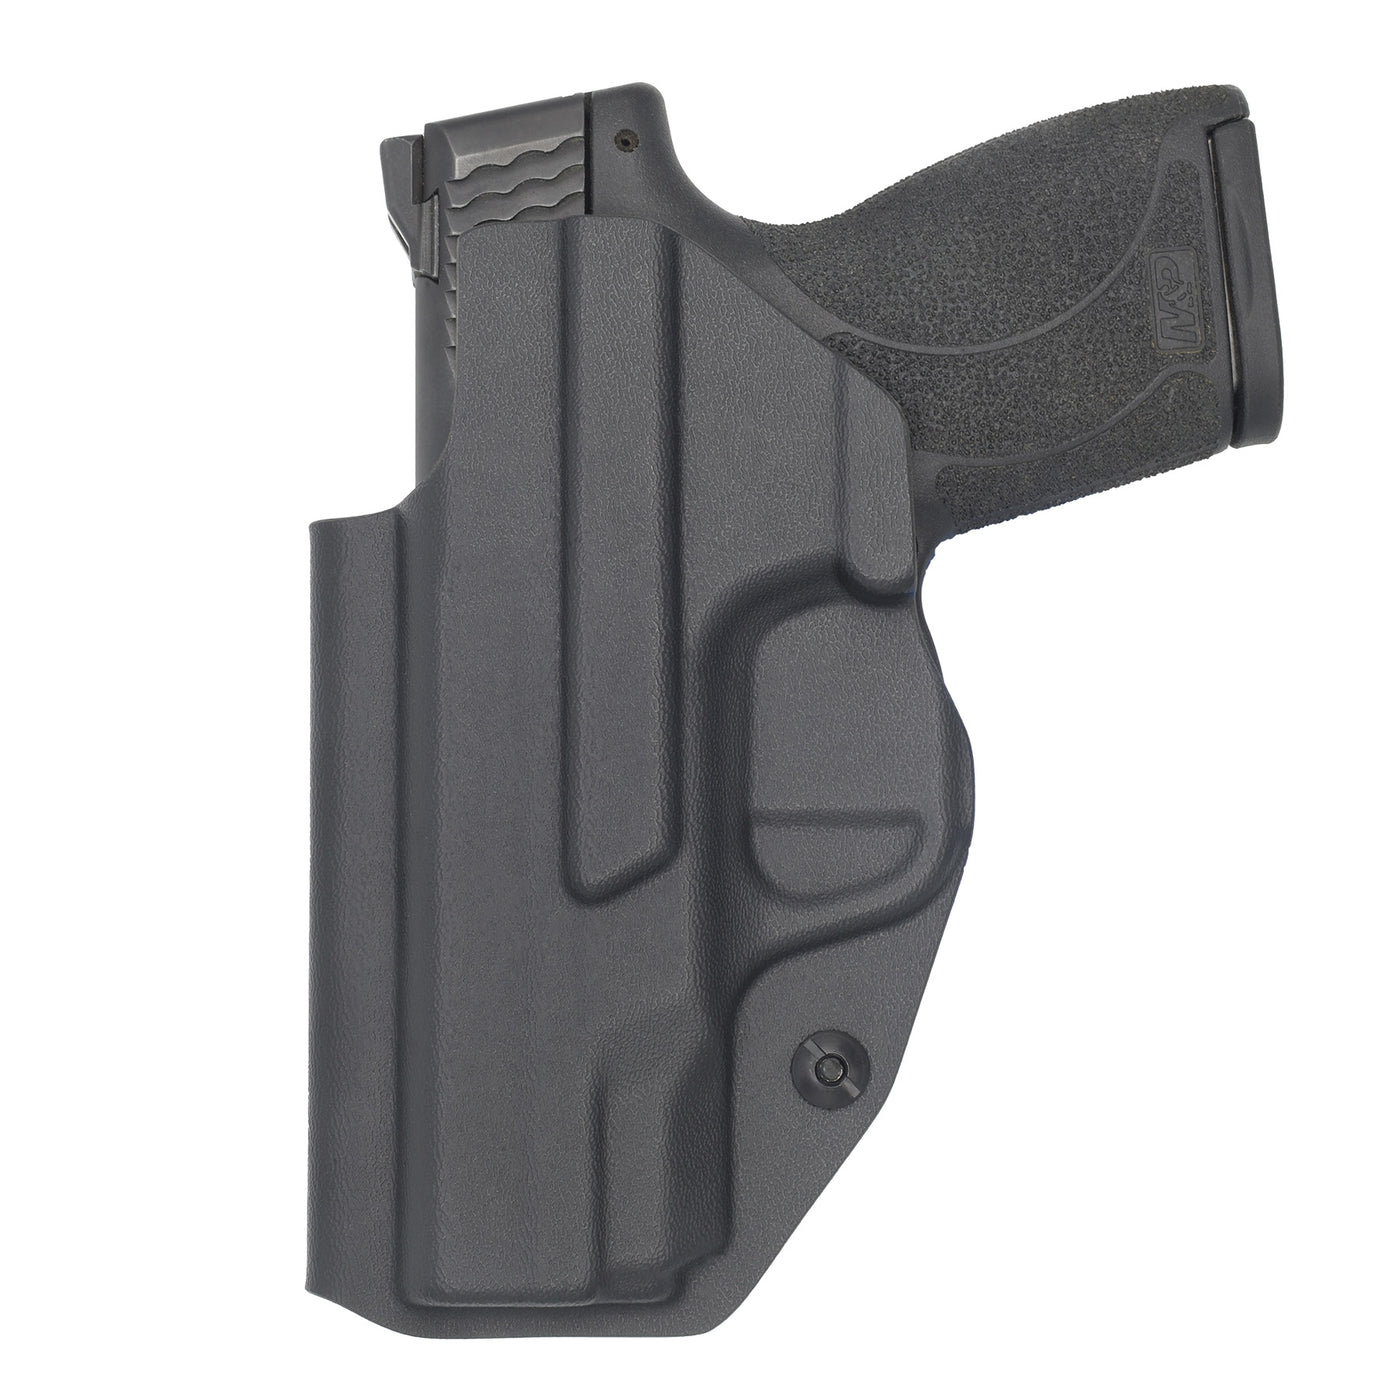 C&G Holsters custom Covert IWB kydex holster for Smith & Wesson M&P Shield 45 in black rear view